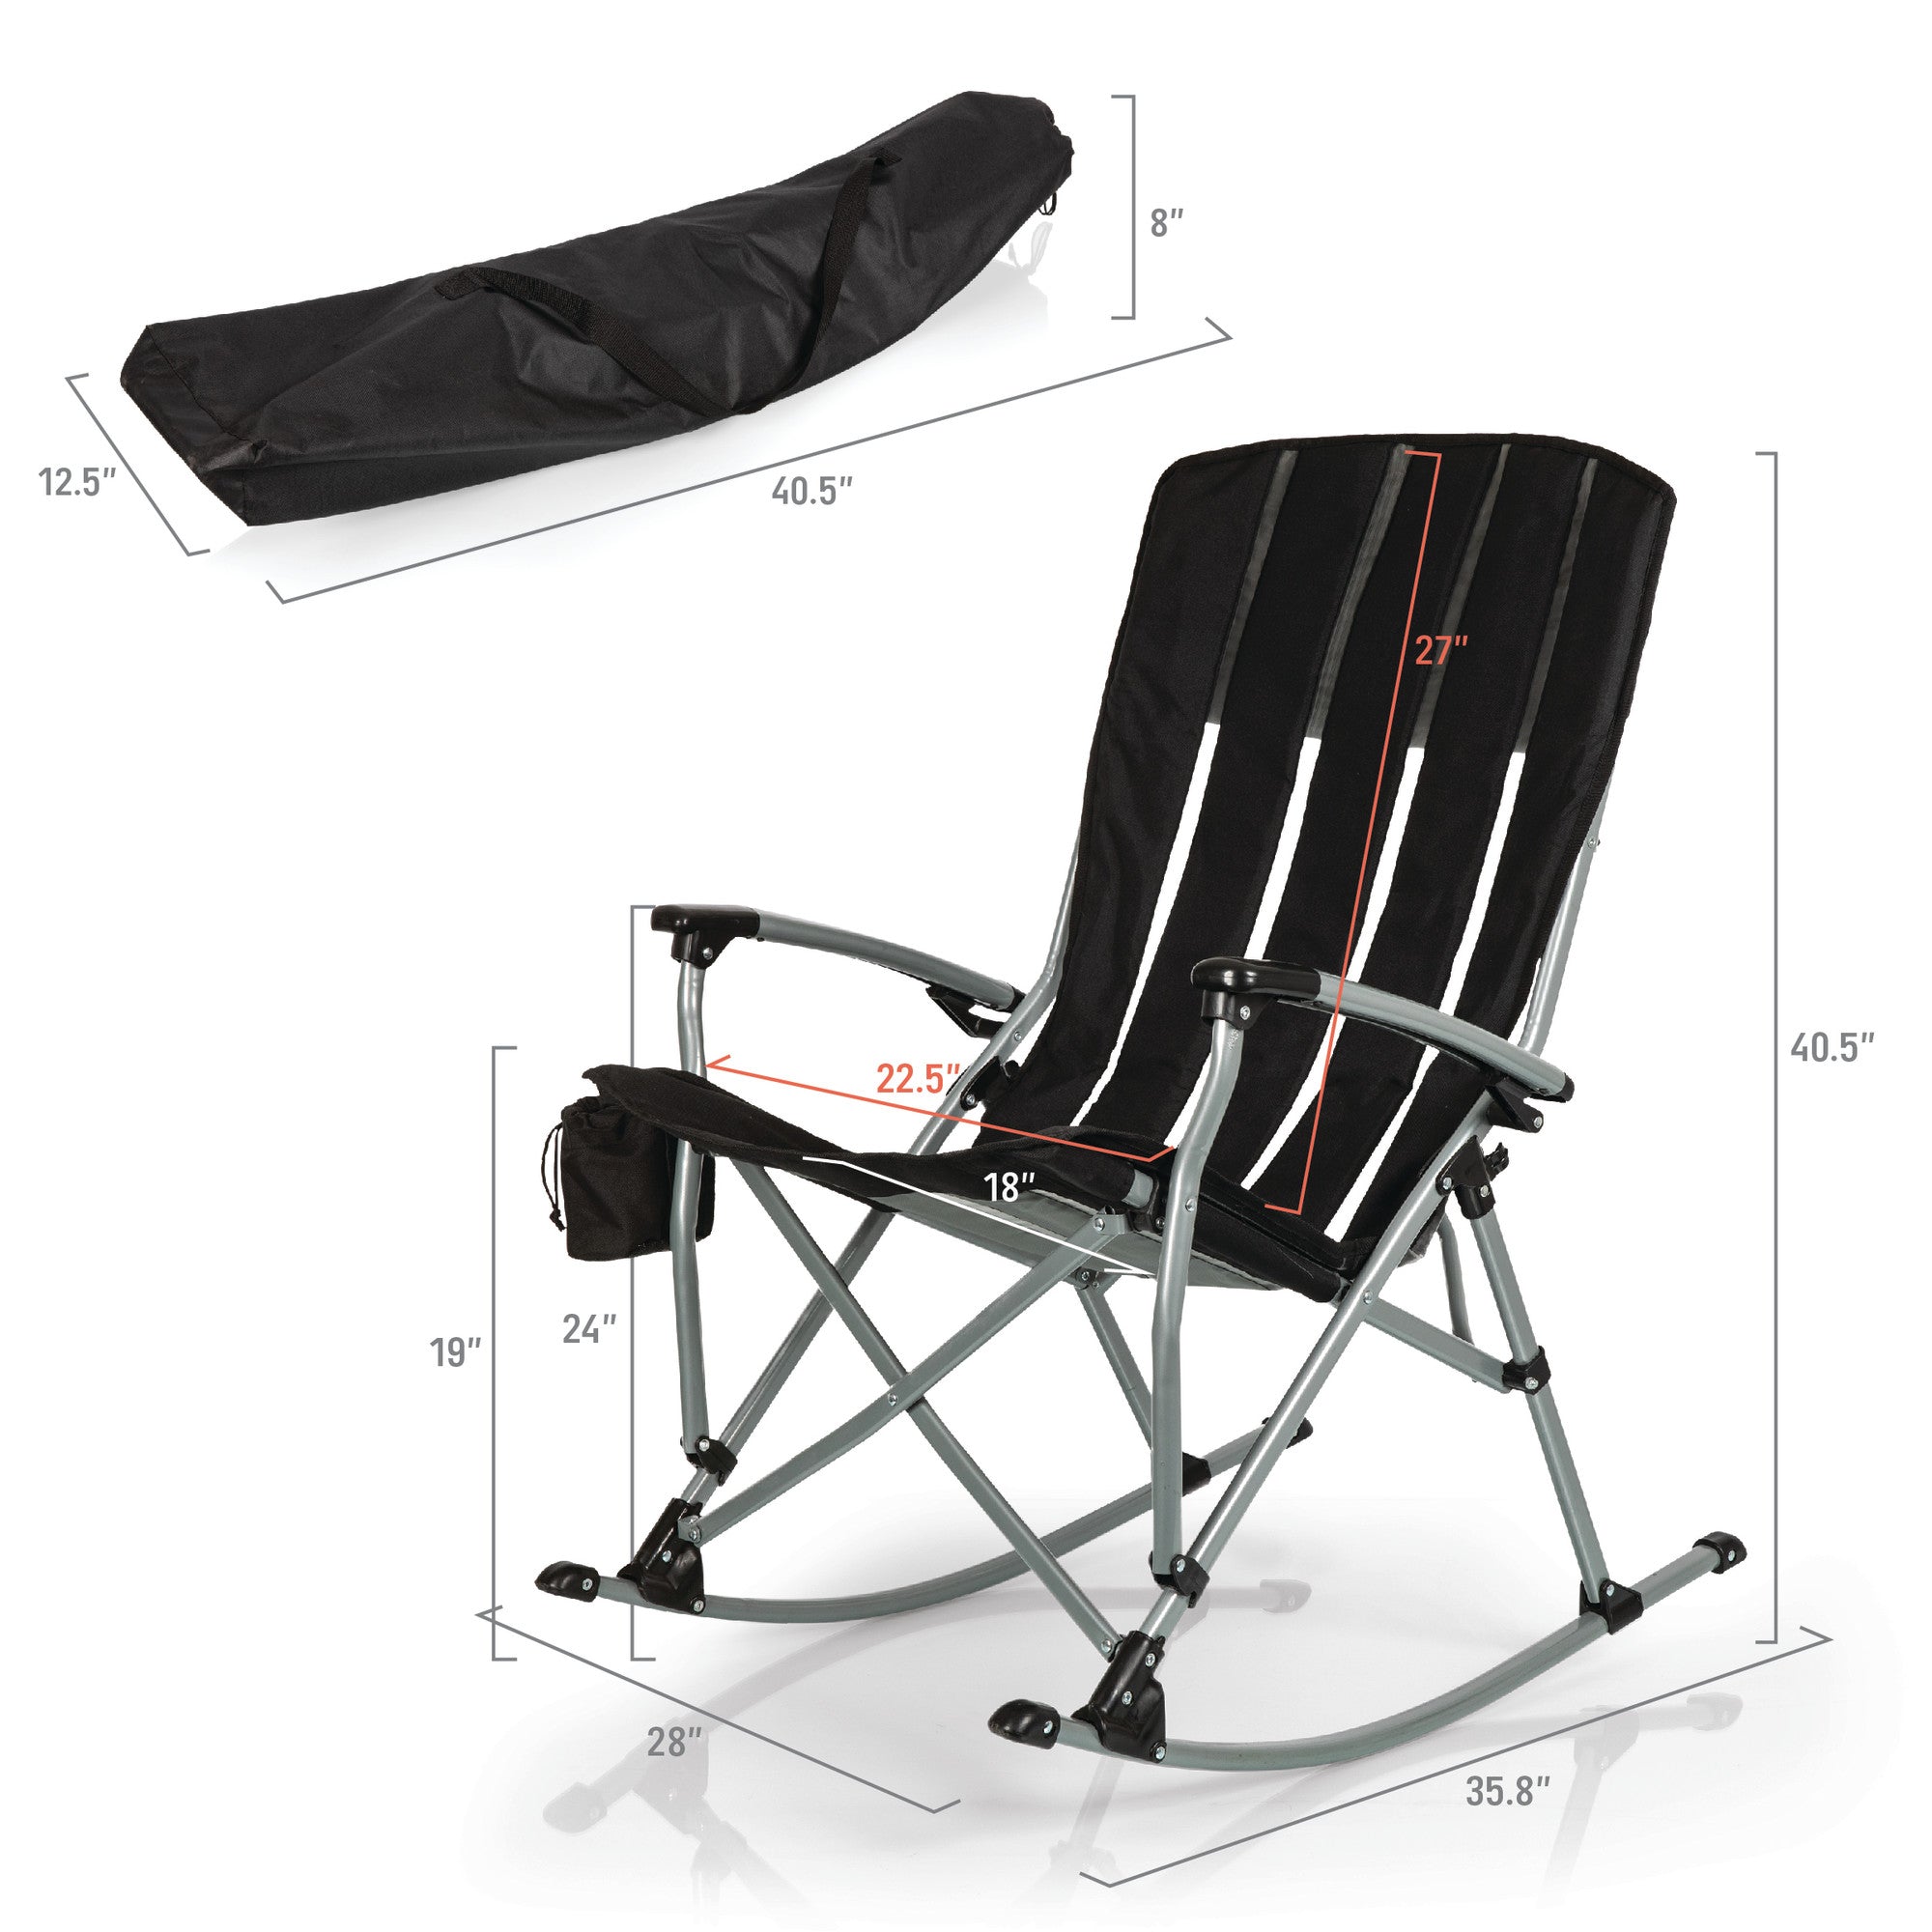 Maryland Terrapins - Outdoor Rocking Camp Chair